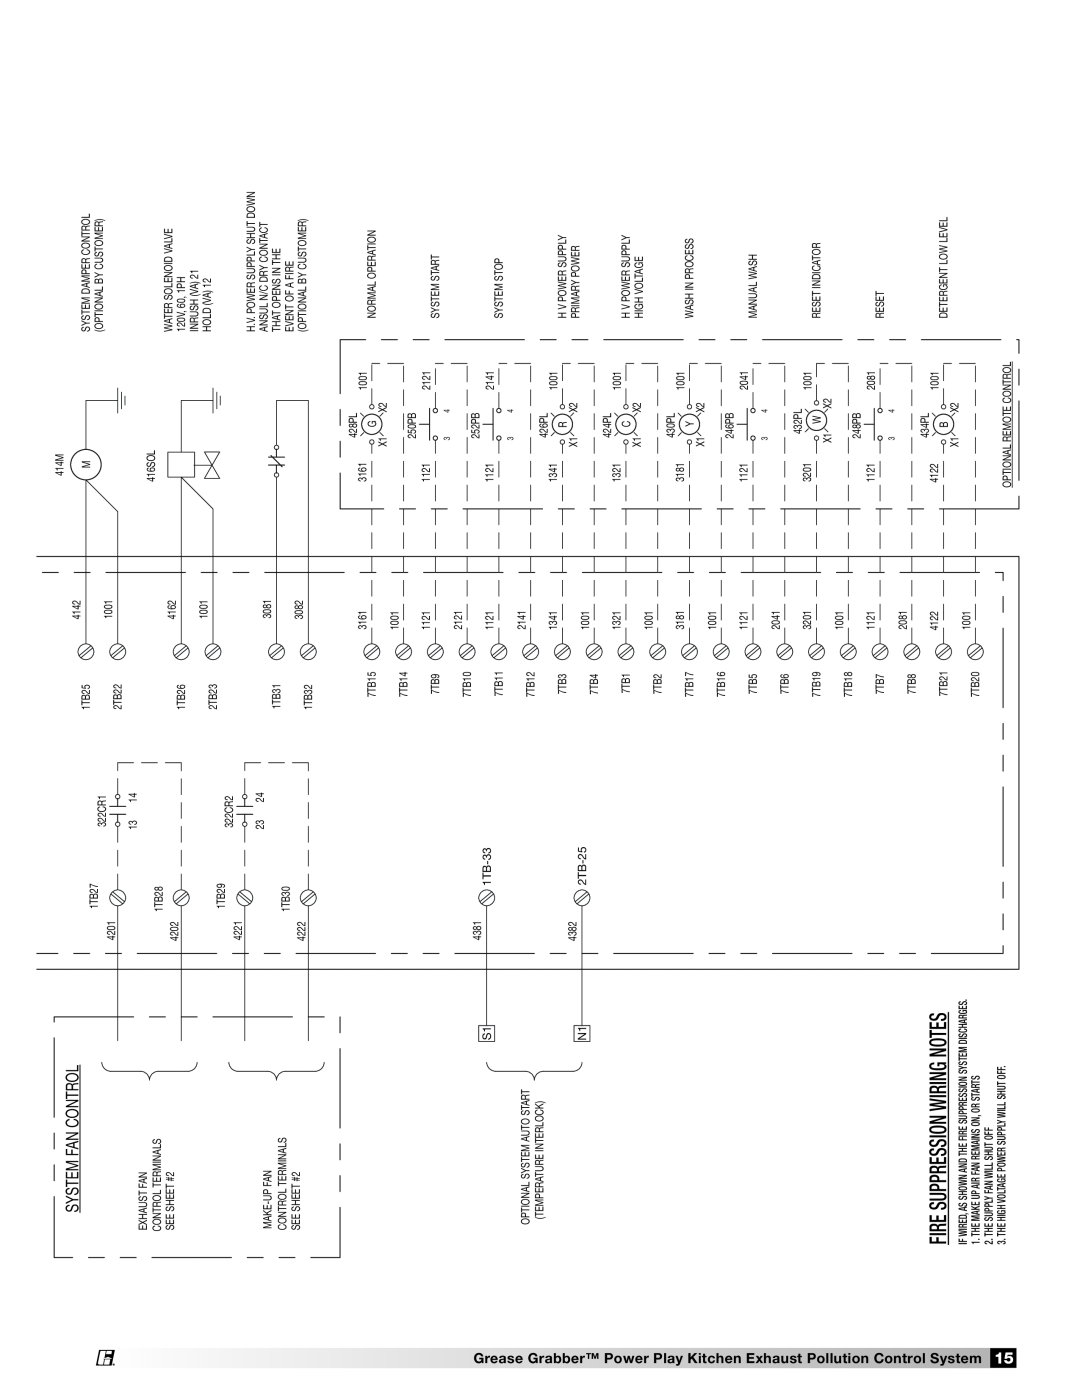 Greenheck Fan 474754 installation manual Fire Suppression Wiring Notes, System Fan Control 